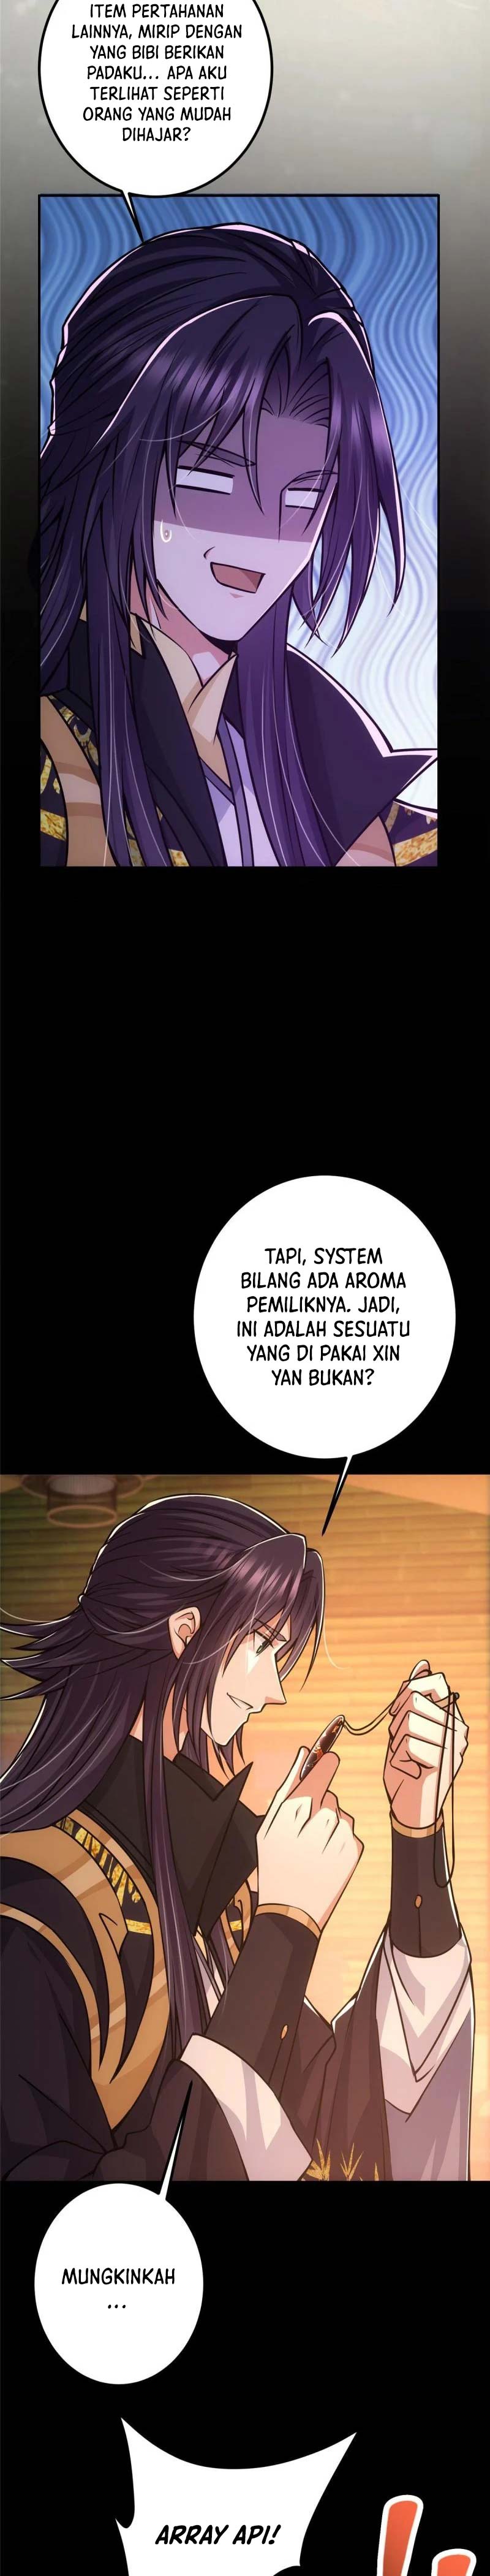 Keep A Low Profile, Sect Leader Chapter 110 Bahasa Indonesia